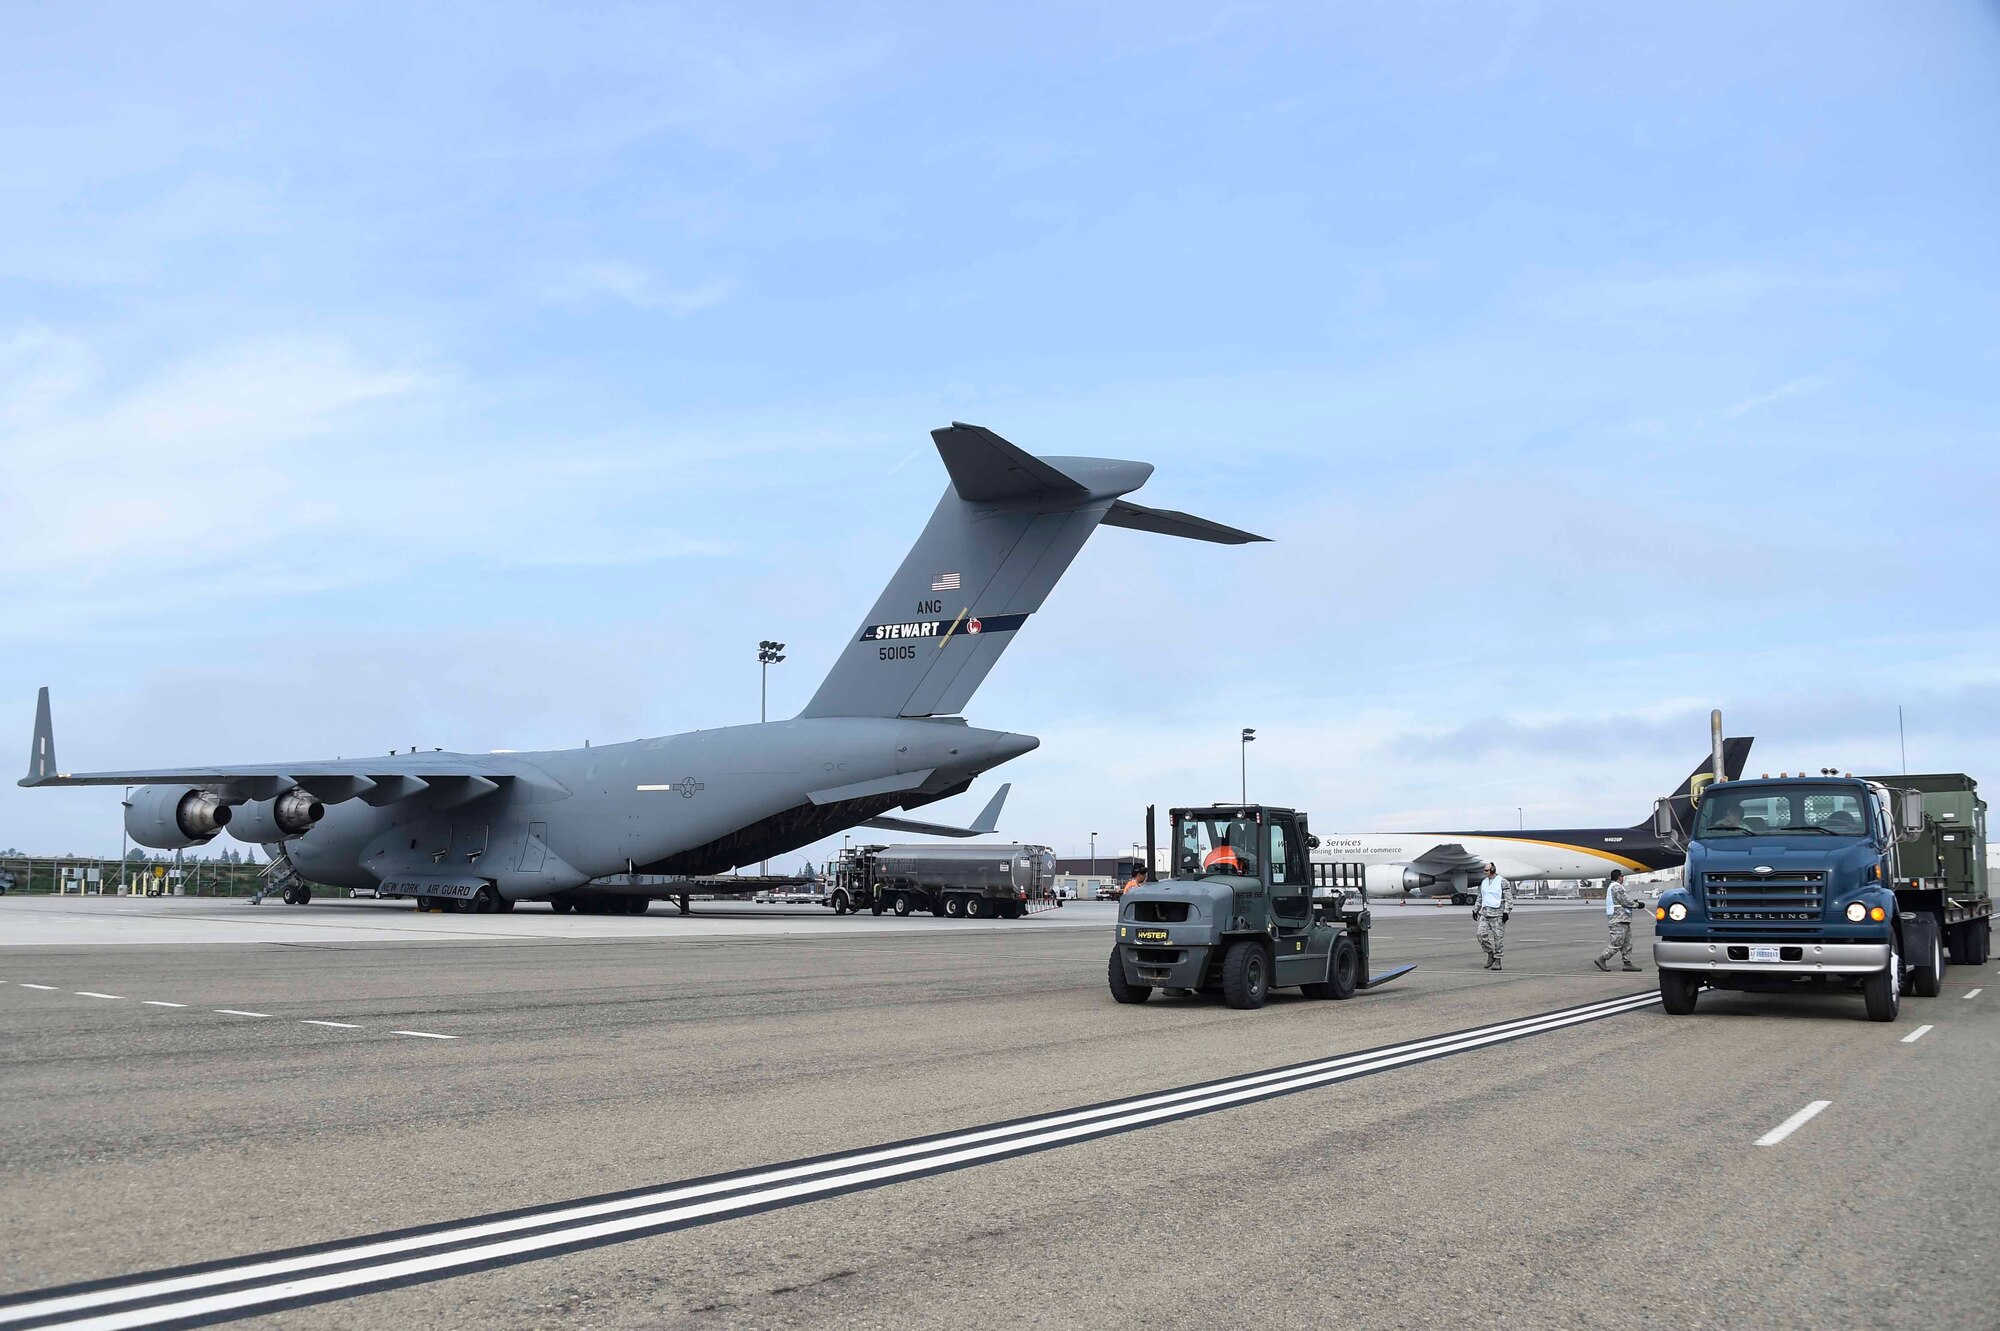 Airmen assigned to the New York Air National Guard’s 105th Airlift Wing and Fresno ANG’s 144th Fighter Wing, prepare to load a C-17 Globemaster III at the Fresno ANG Base, Jan. 21, 2016, in support of the 144th FW's participation in Red Flag 16-01. Red Flag is a realistic combat training exercise, which is hosted by Nellis Air Force Base, Nevada and the U.S. Air Force Warfare Center. The 105th AW airlifted 12 pallets and 29 personnel assigned to the 144th FW. (U.S. Air National Guard Senior Airman Klynne Pearl Serrano)